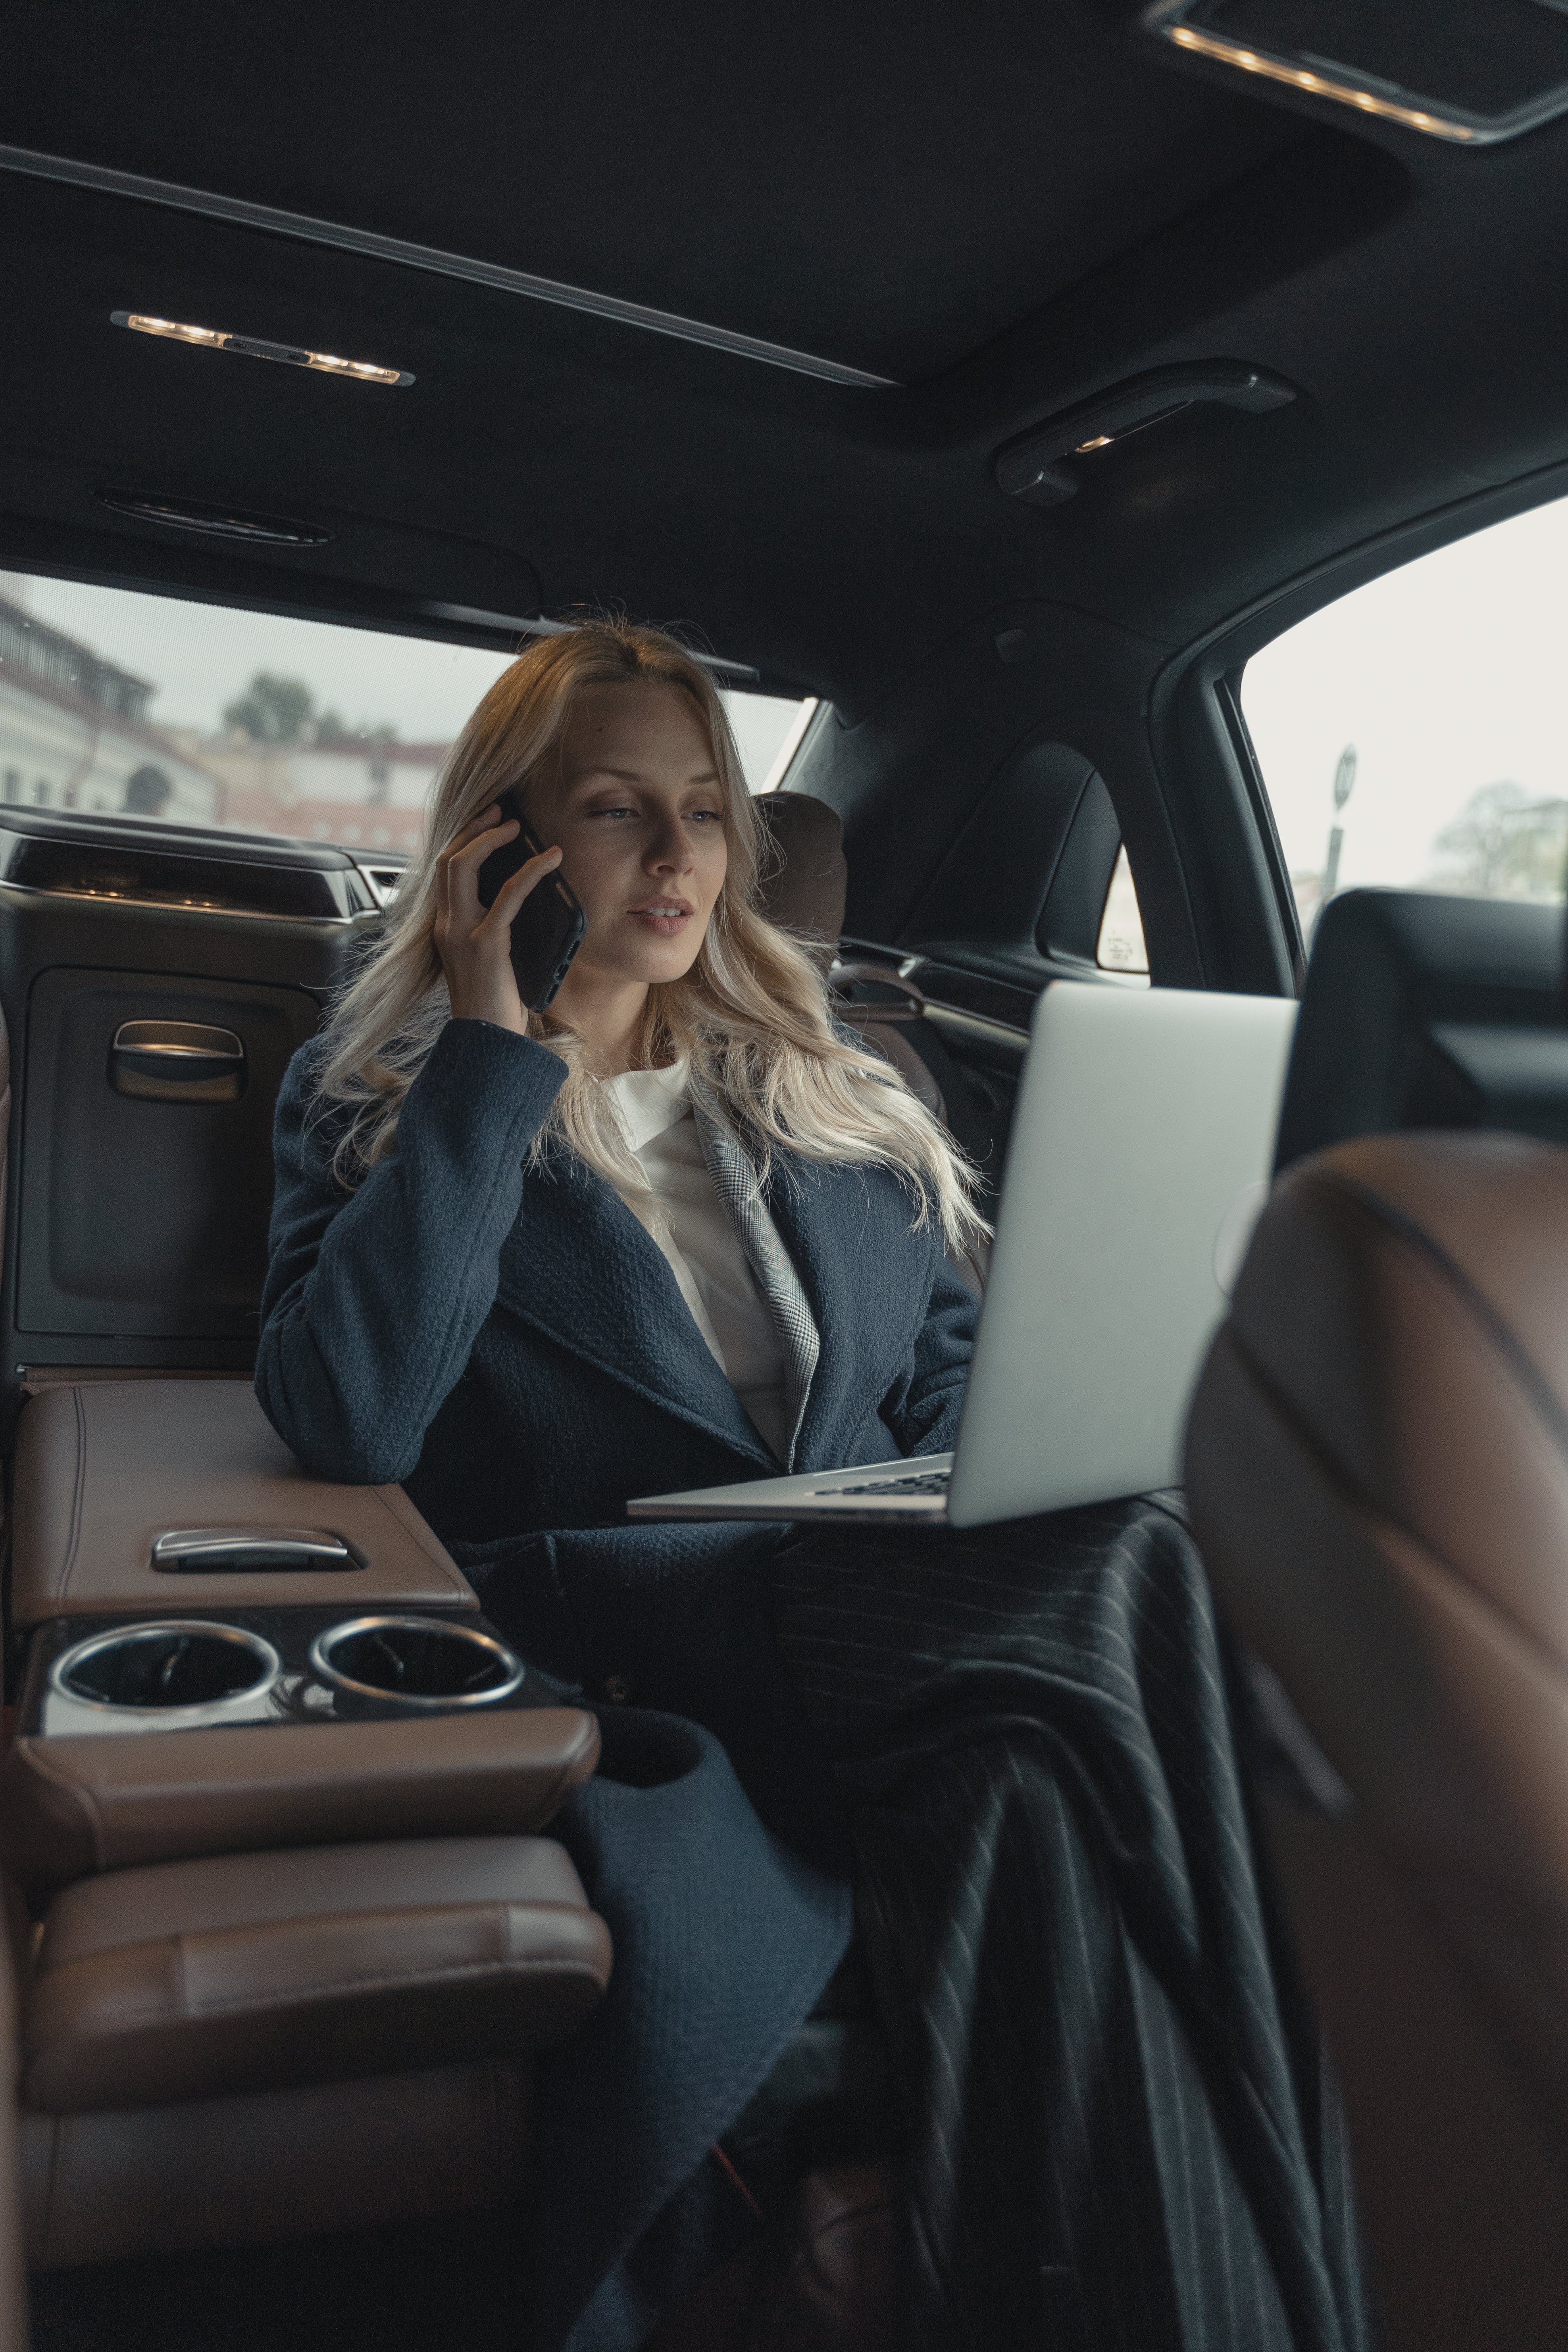 A businesswoman siting in a luxurious car. | Source: Pexels